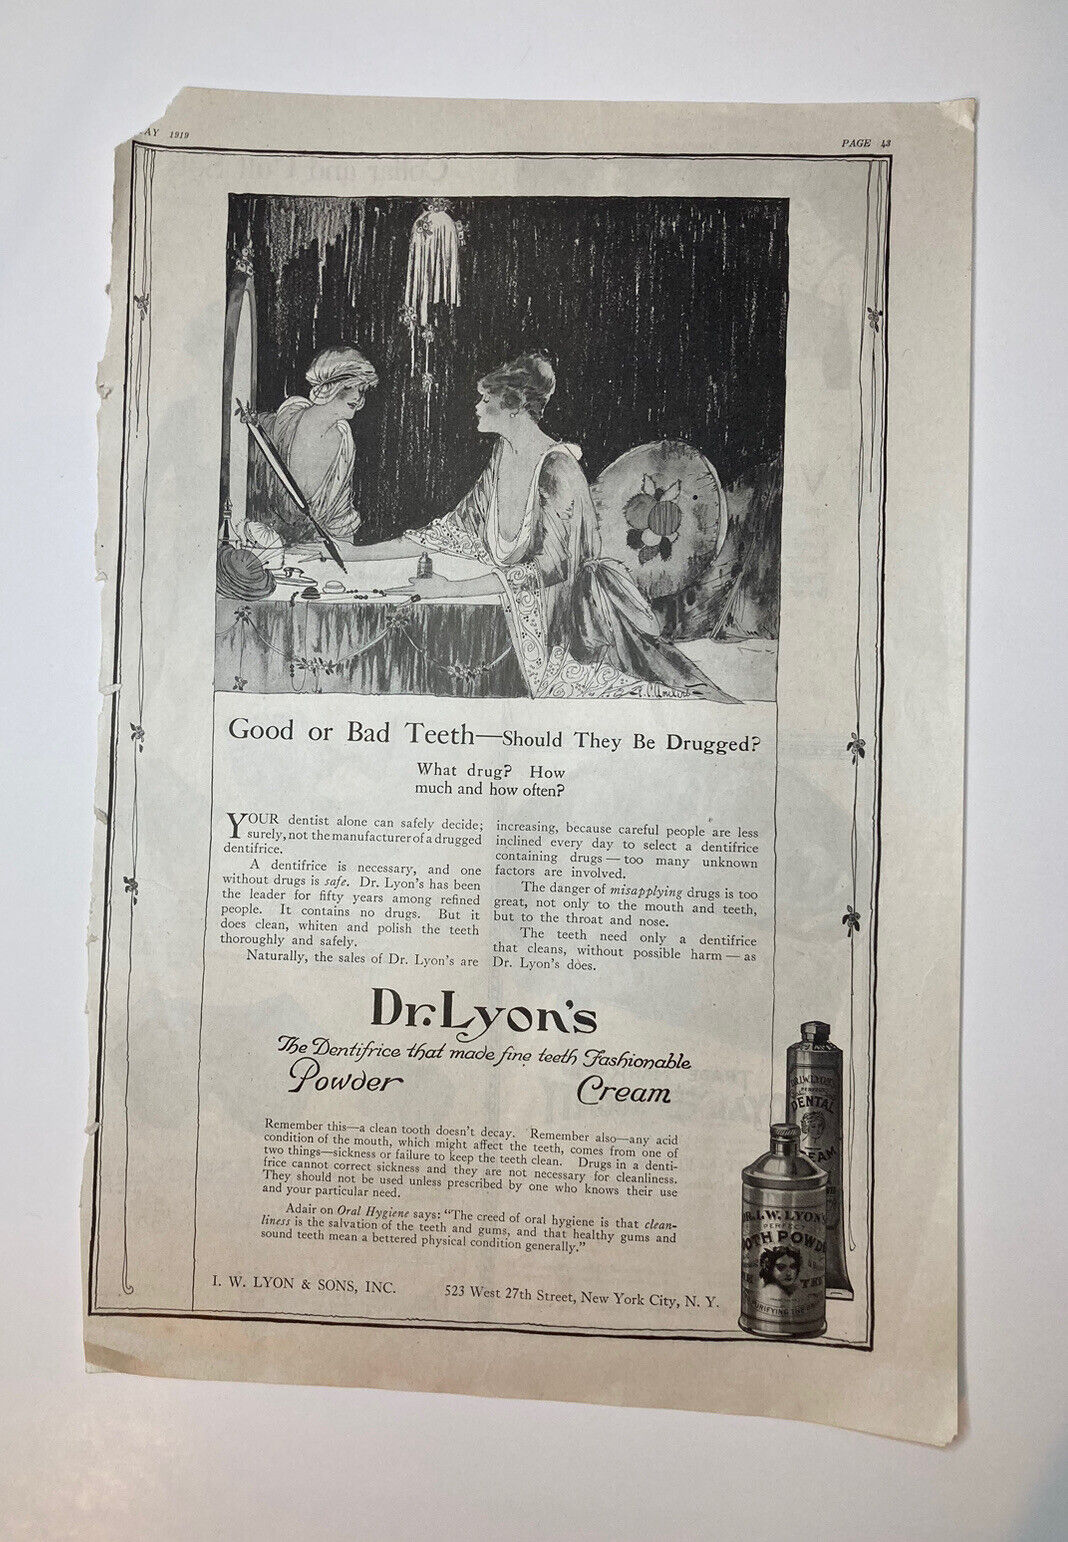 ANTIQUE 1919 Print Ad Good Or Bad Teeth - Should They Be Drugged? Dr. Lyon’s